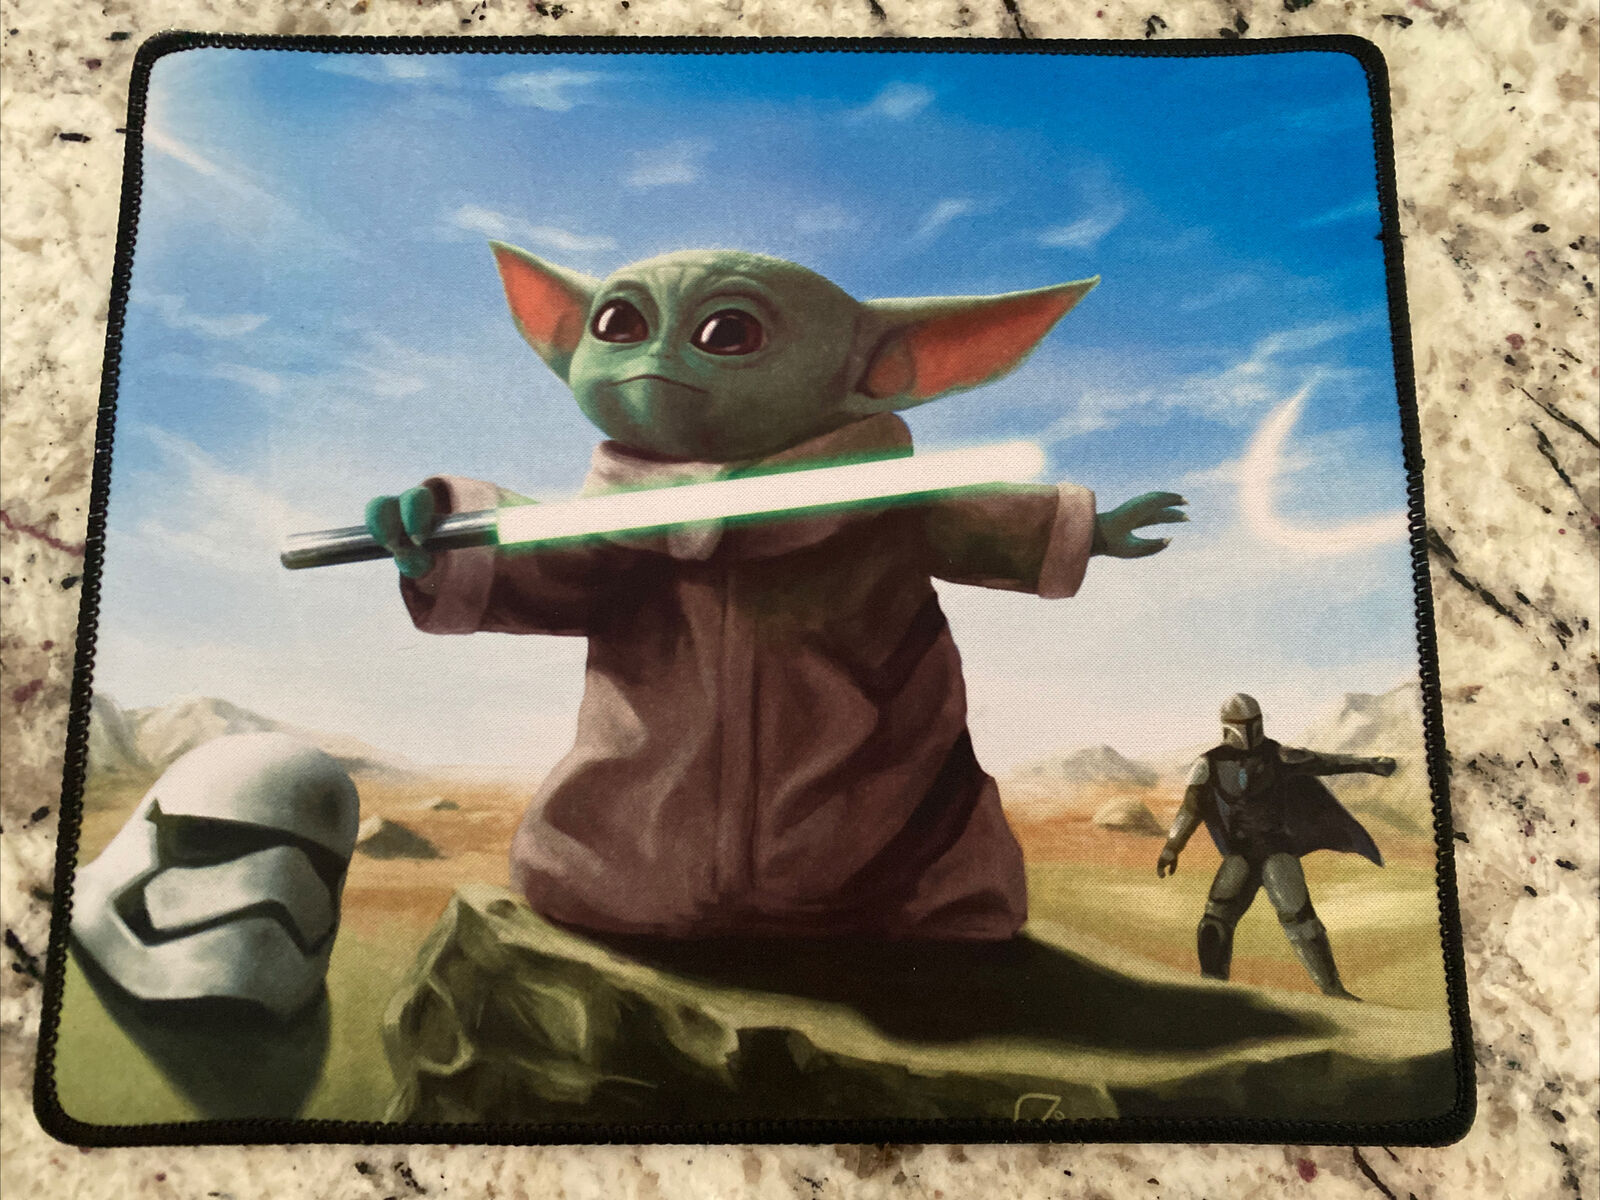 Baby Yoda Mouse Pad Rectangular Non-Slip Rubber Mouse Pad Used for Office Wor...